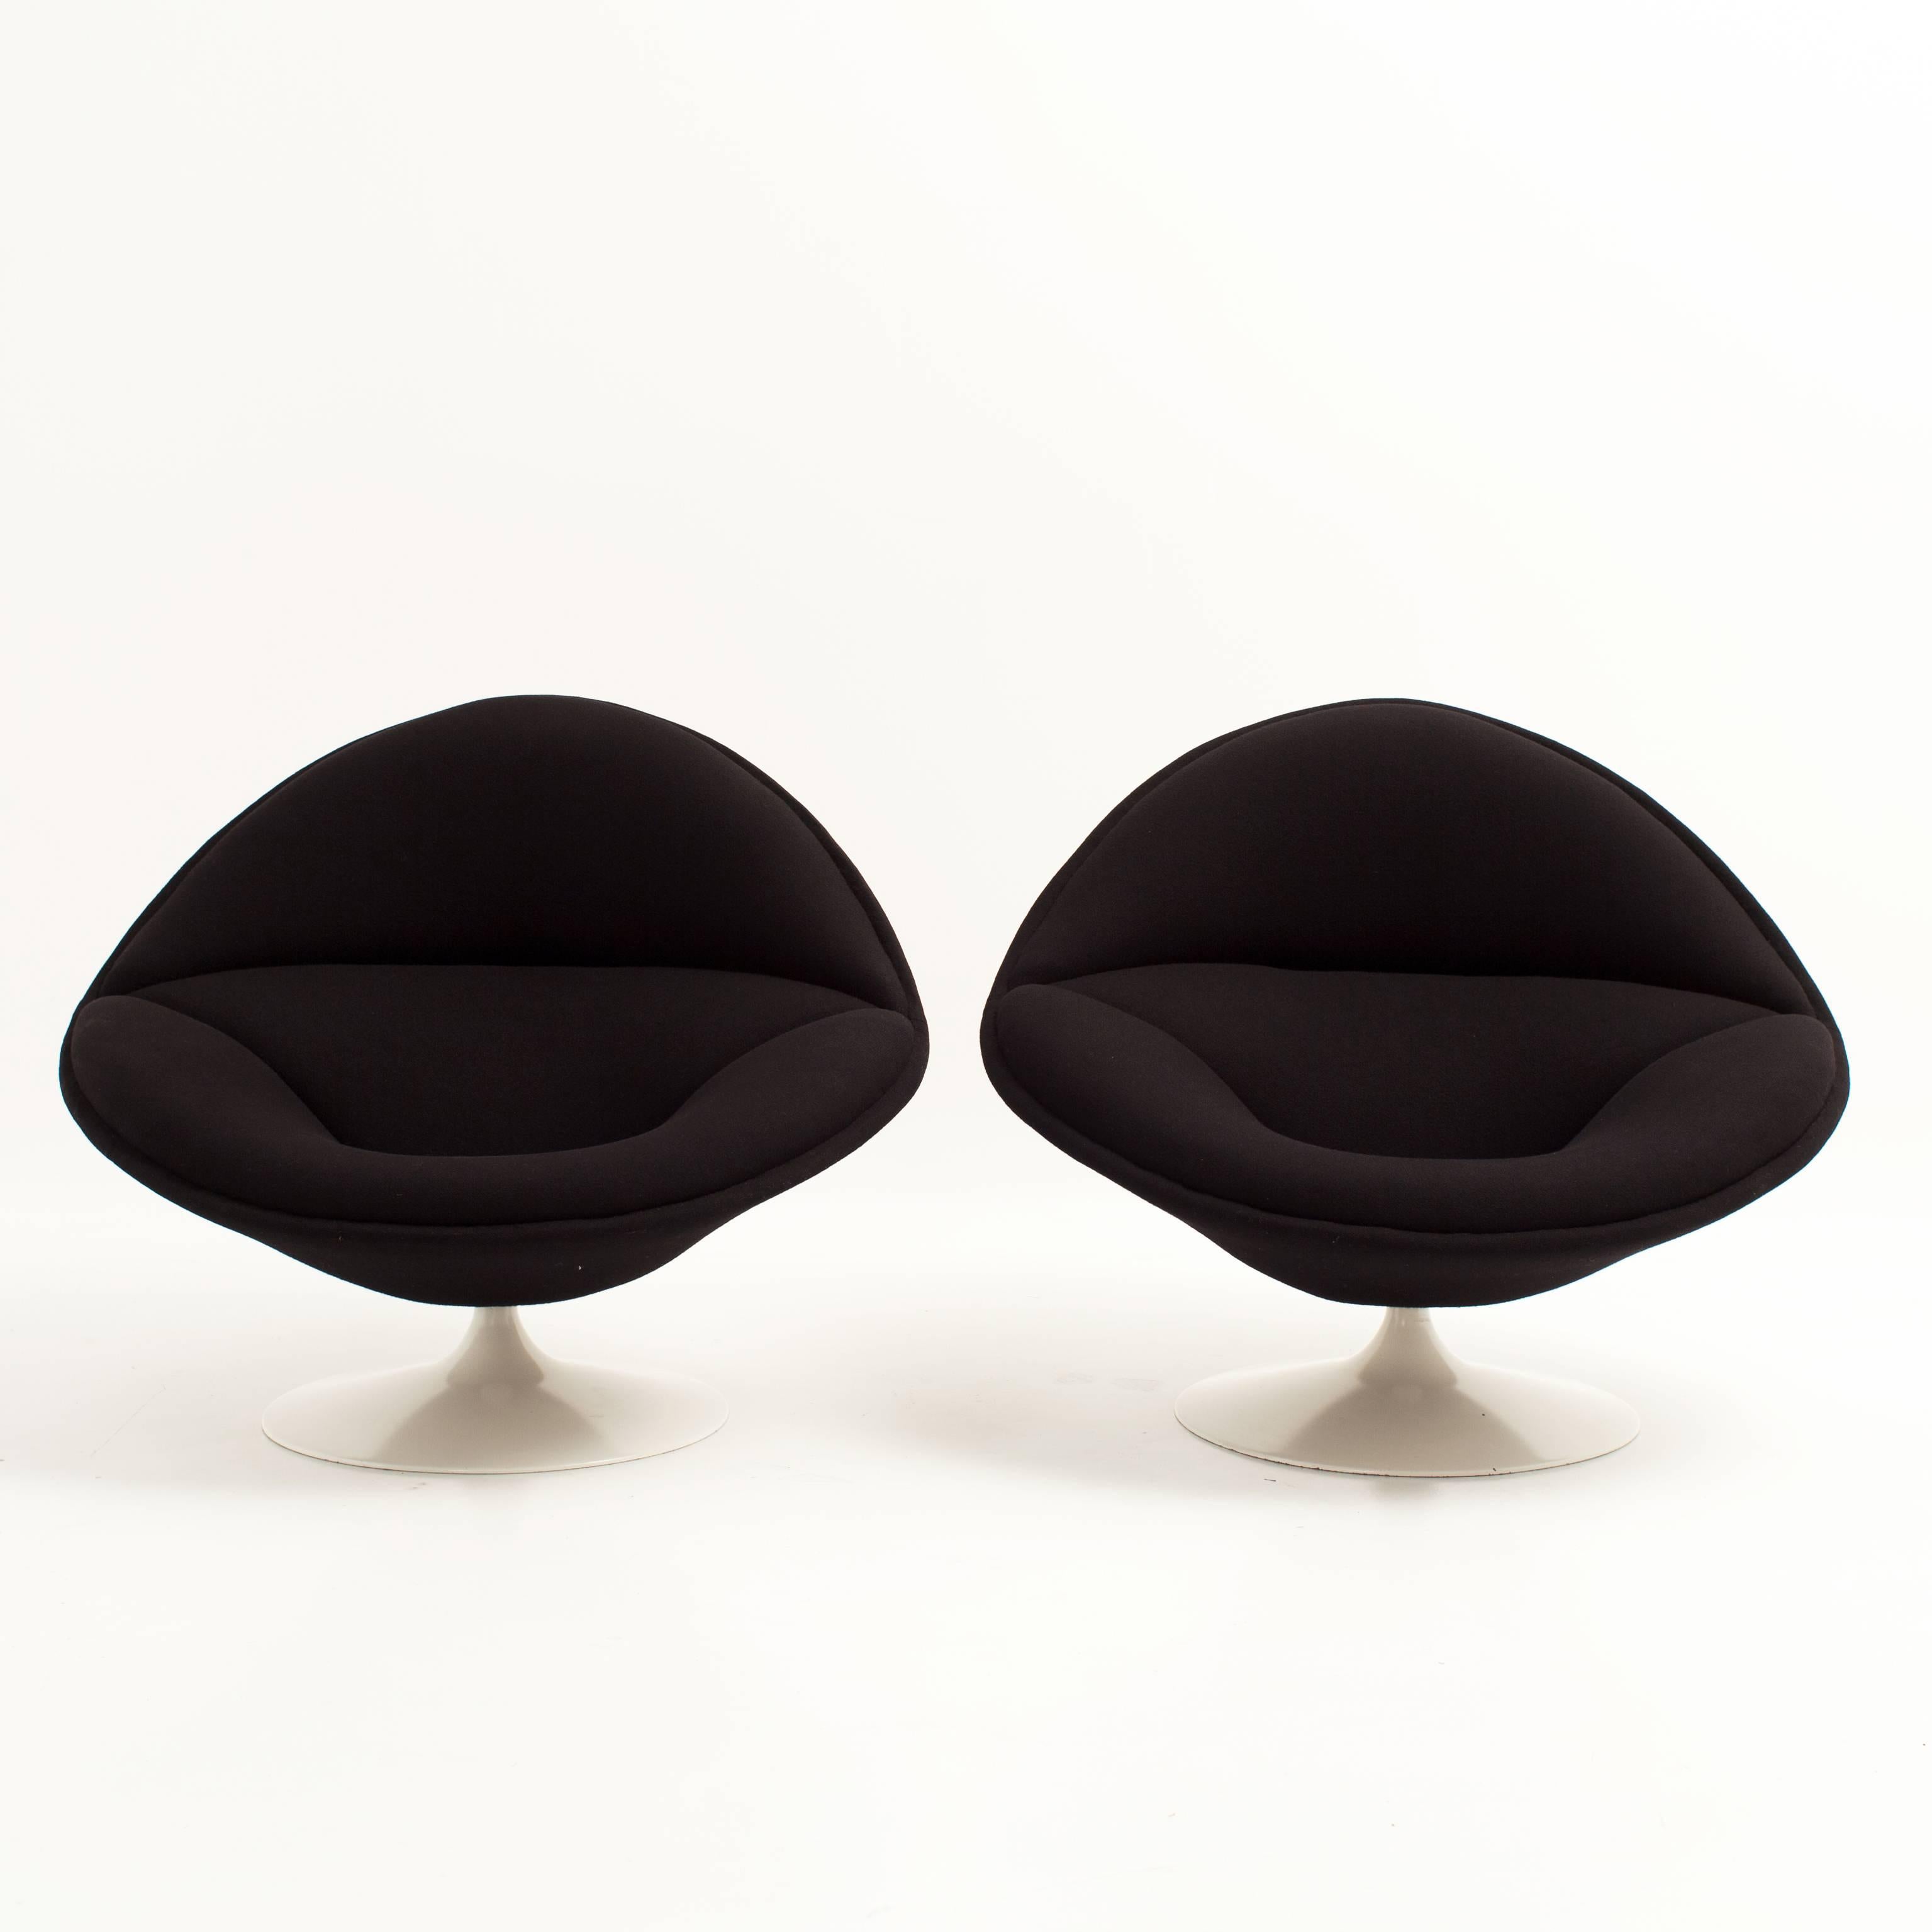 Rare pair of original F553 swivel lounge chairs by Pierre Paulin for Artifort 1963. 
Upholstered in black fabric, original finish to the base.
Precursors of the globe chair, these where no longer manufactured qnd only produced for a short period